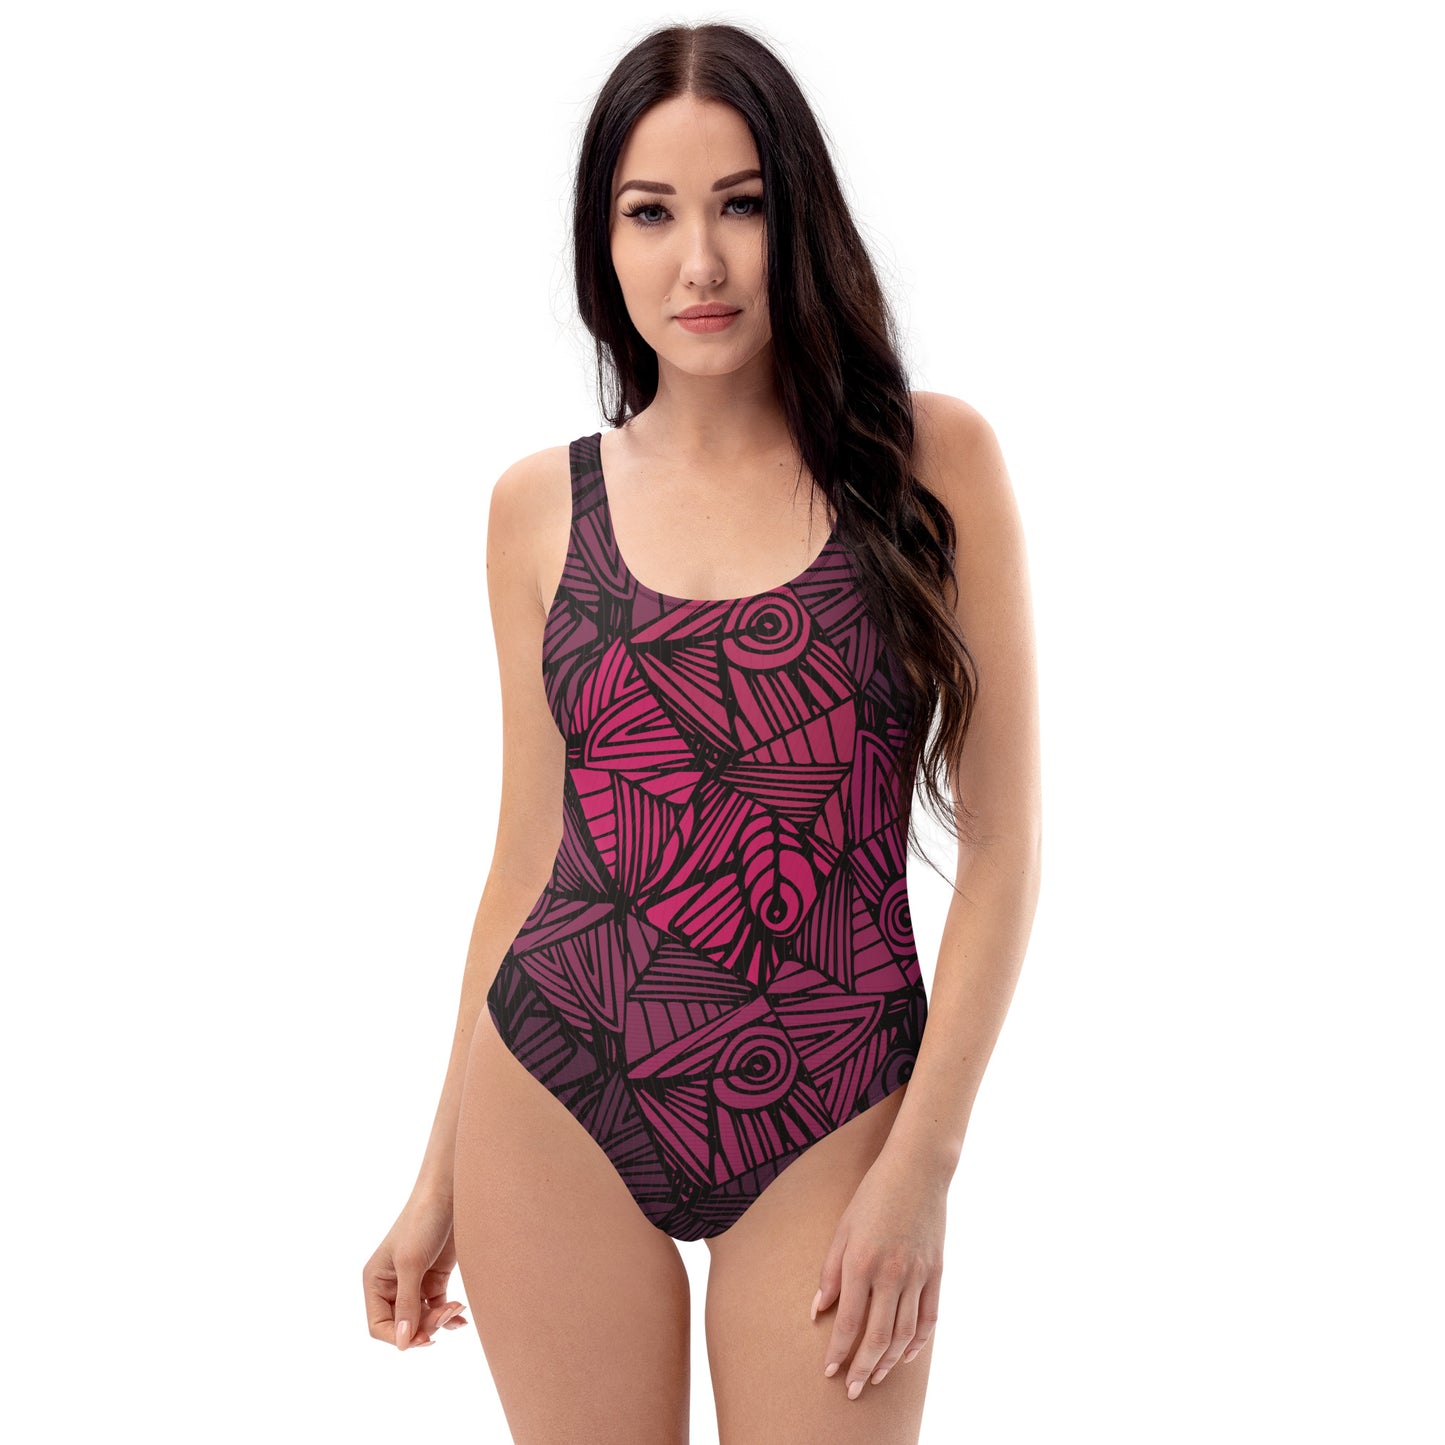 Worldtown Guaranteed To Dream One-Piece Swimsuit